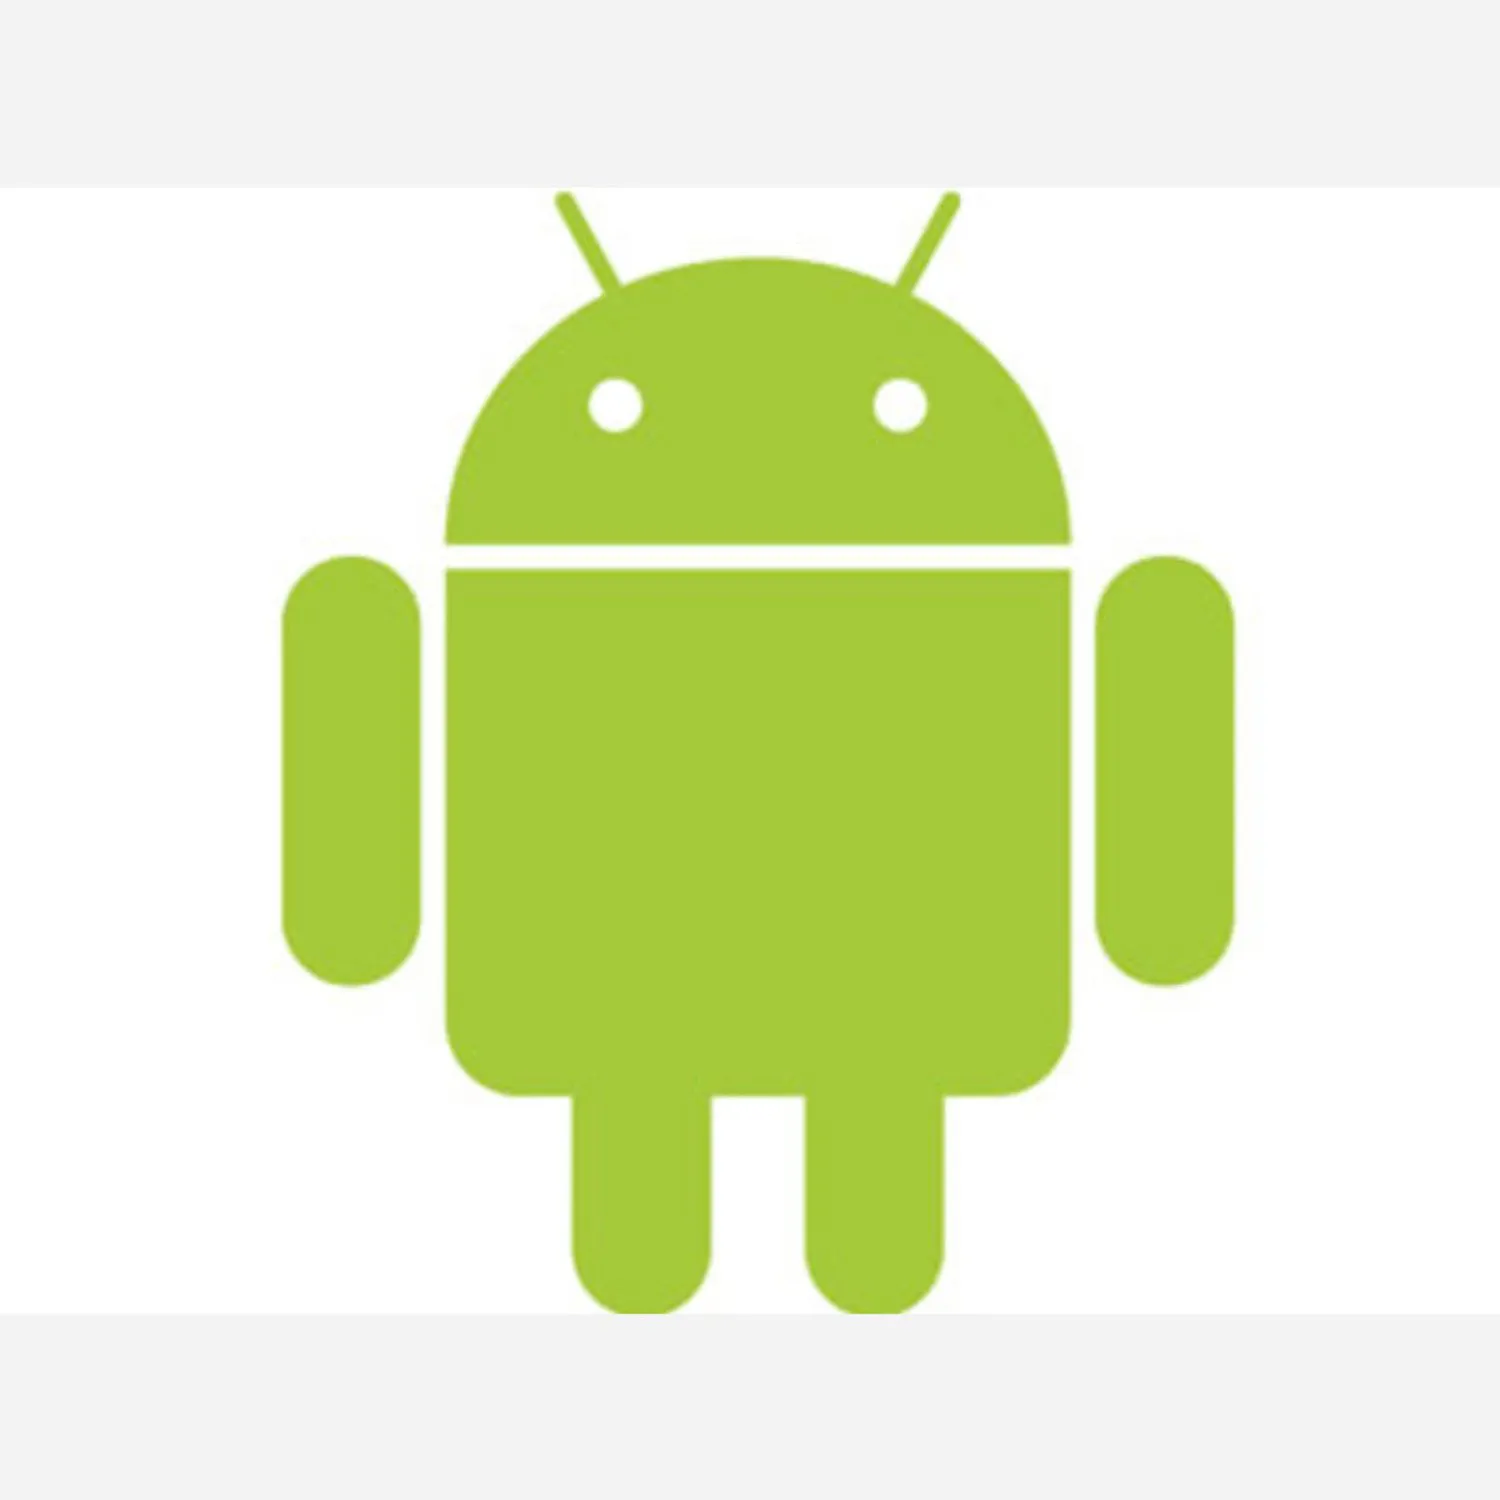 Photo of Android - Sticker!